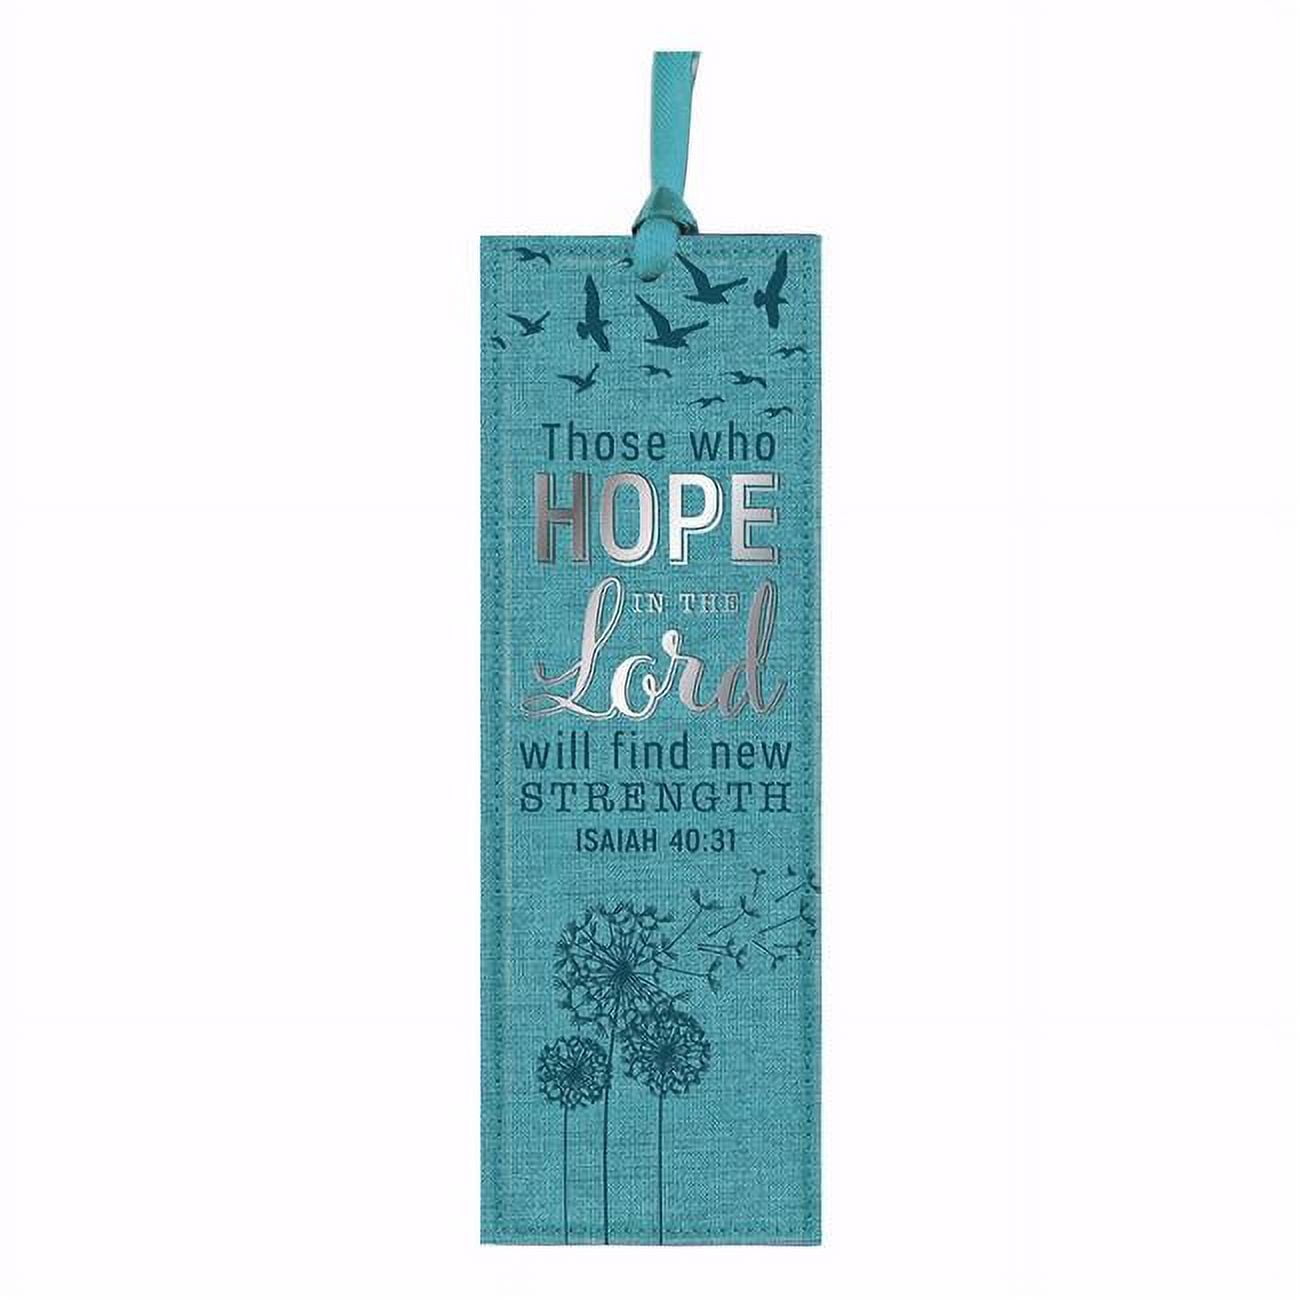 Picture of Christian Art Gifts 189316 Those Who Hope Pagemarker - Bookmark, Teal Lux Leather